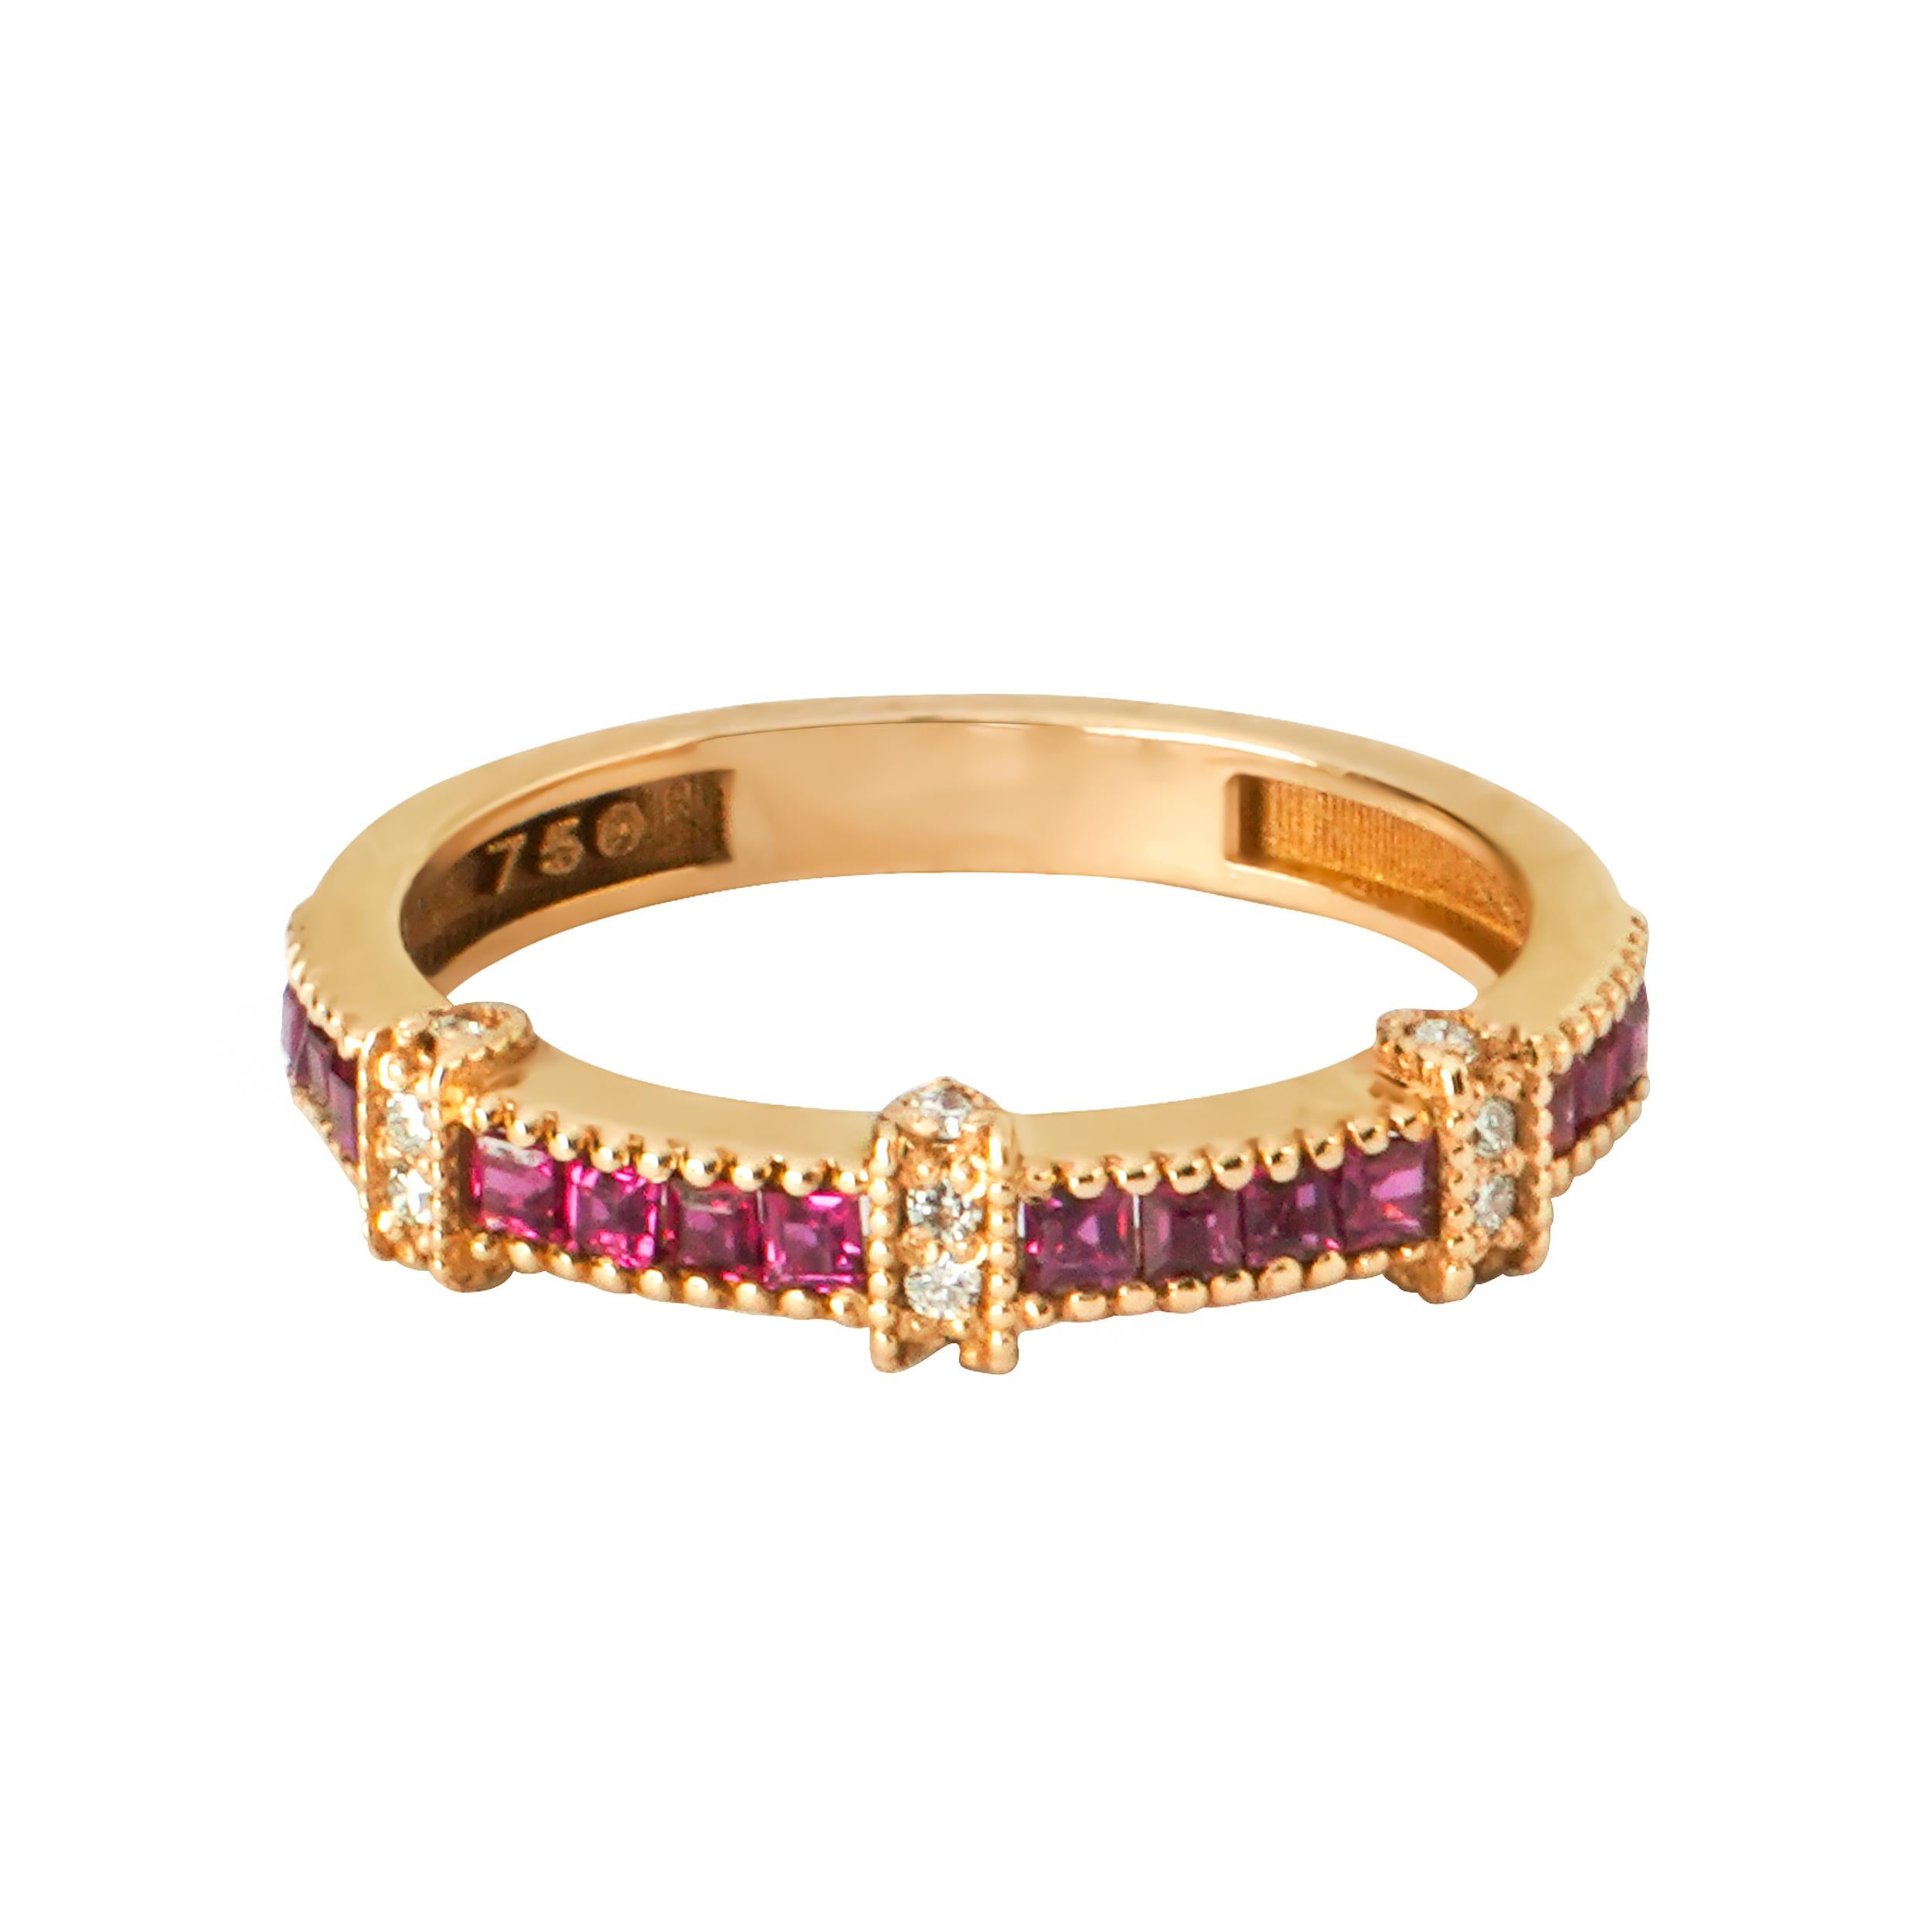 PRODUCT DETAILS:
18k Solid Gold
Stones:
Natural loose ruby 0.57 c.t(approx)
Brilliant cut Moissanite 0.21 c.t (approx)
Color: G-H
Cut: Excellent
Made entirely by hand using ethically sourced stones and reclaimed metals that have been melted down and